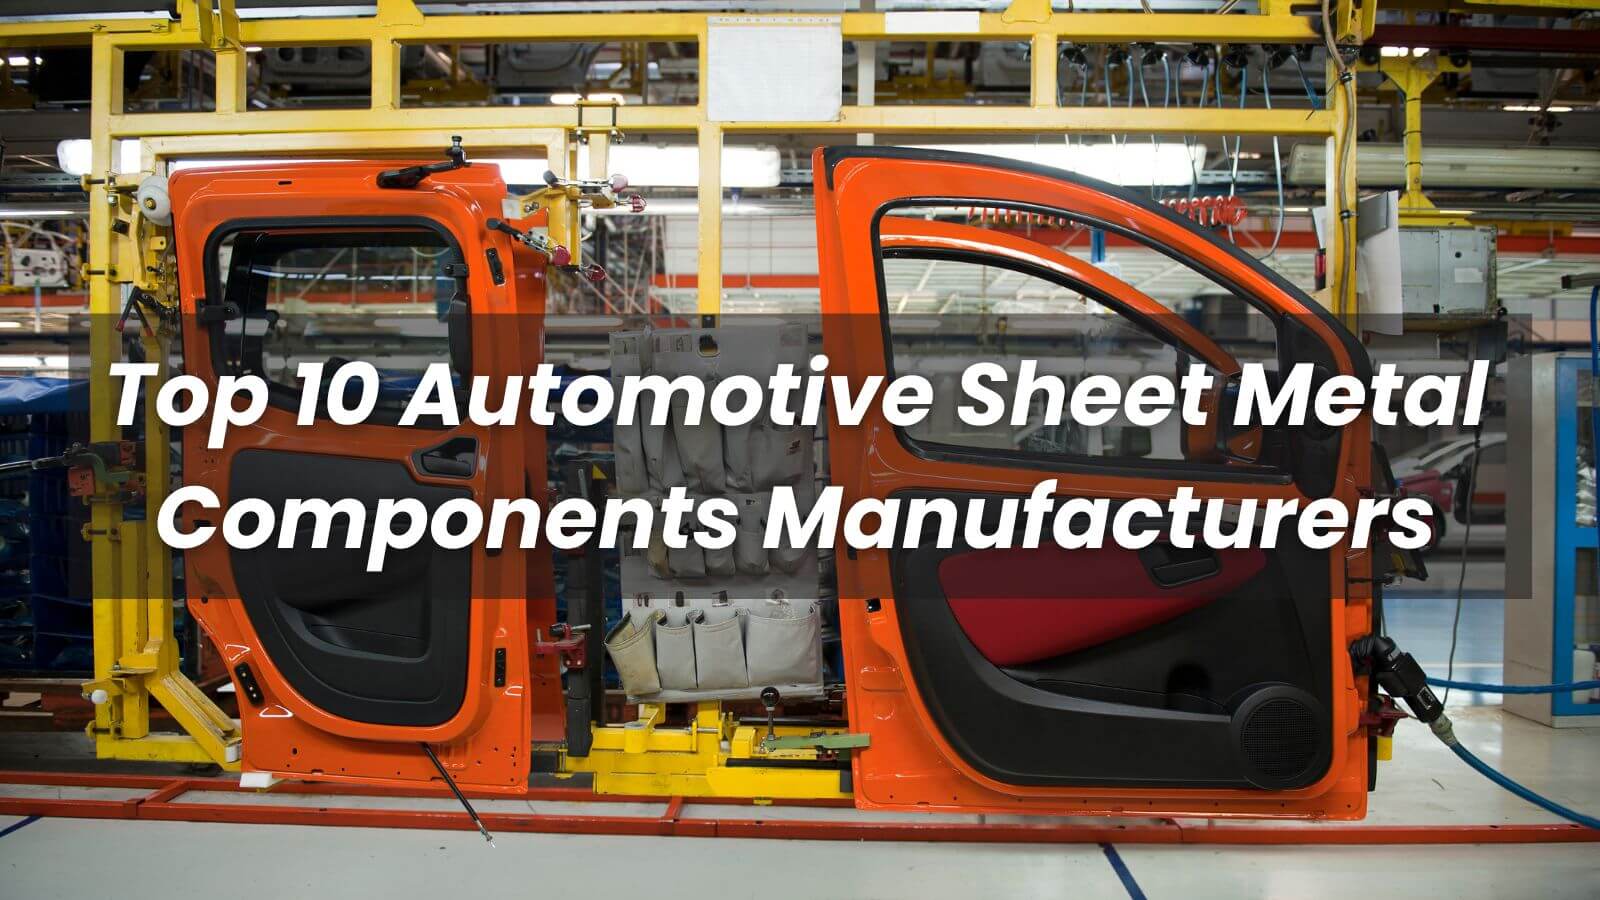 Top 10 Automotive Sheet Metal Components Manufacturers in 2022